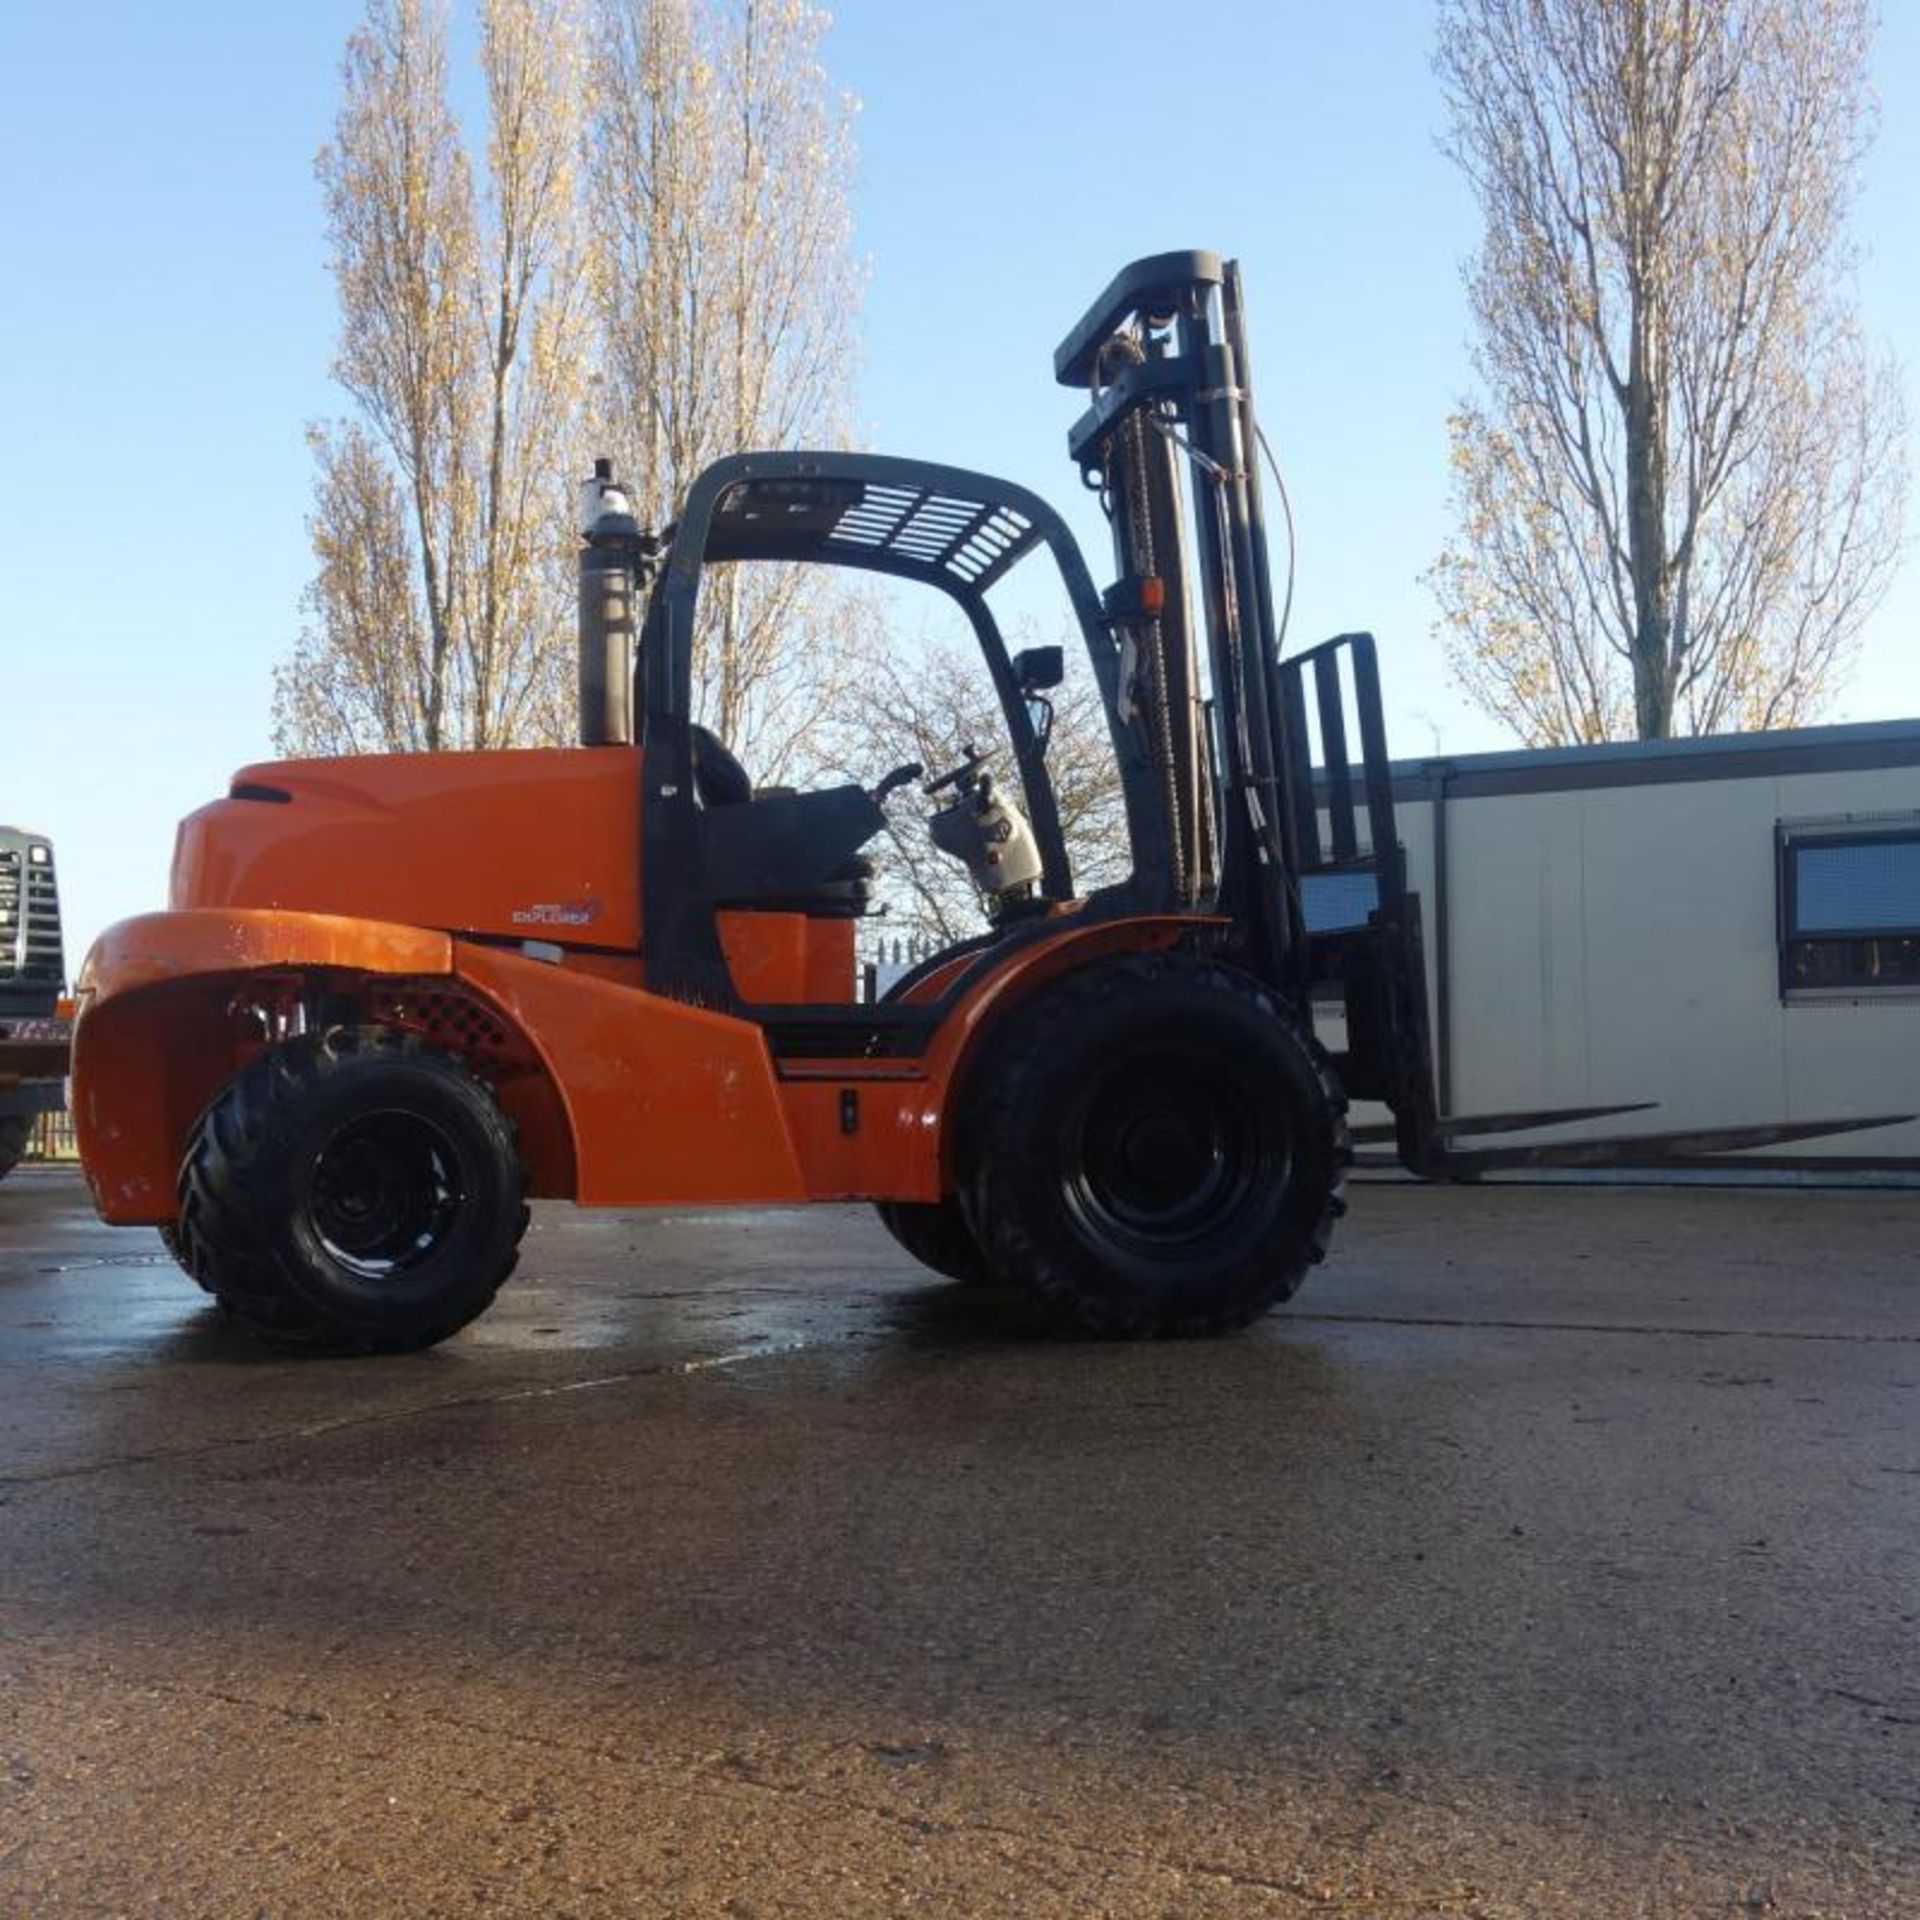 2011 MAST H50DA 4WD 5 Tonne 4x4 Forklift, Two Stage Mask - Image 2 of 11